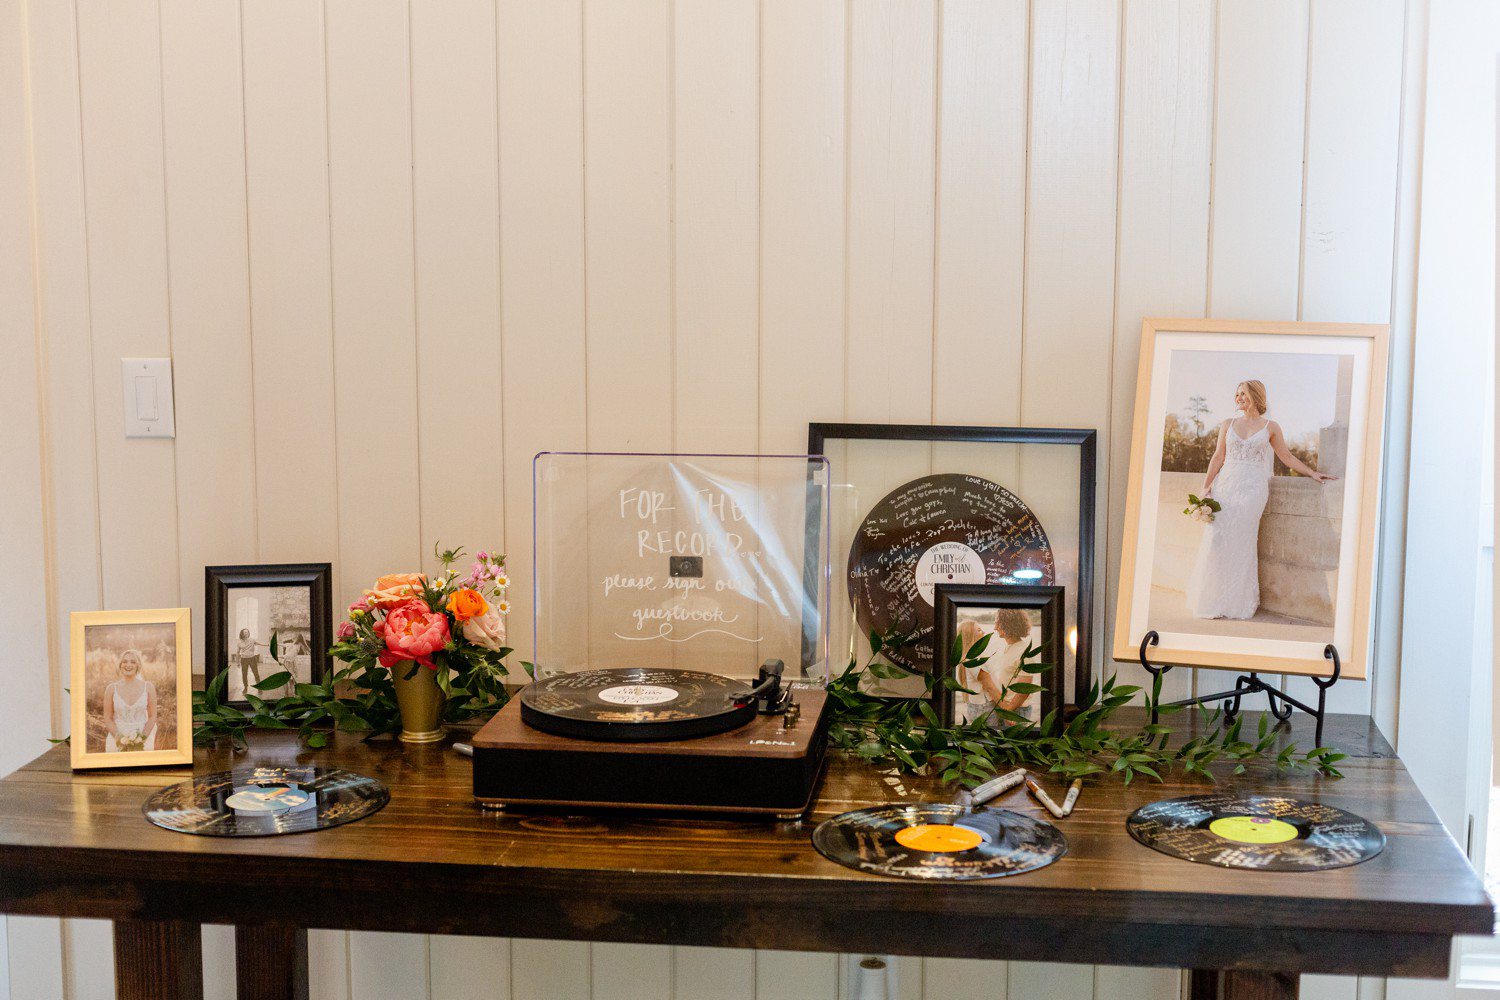 Record player wedding guest book.